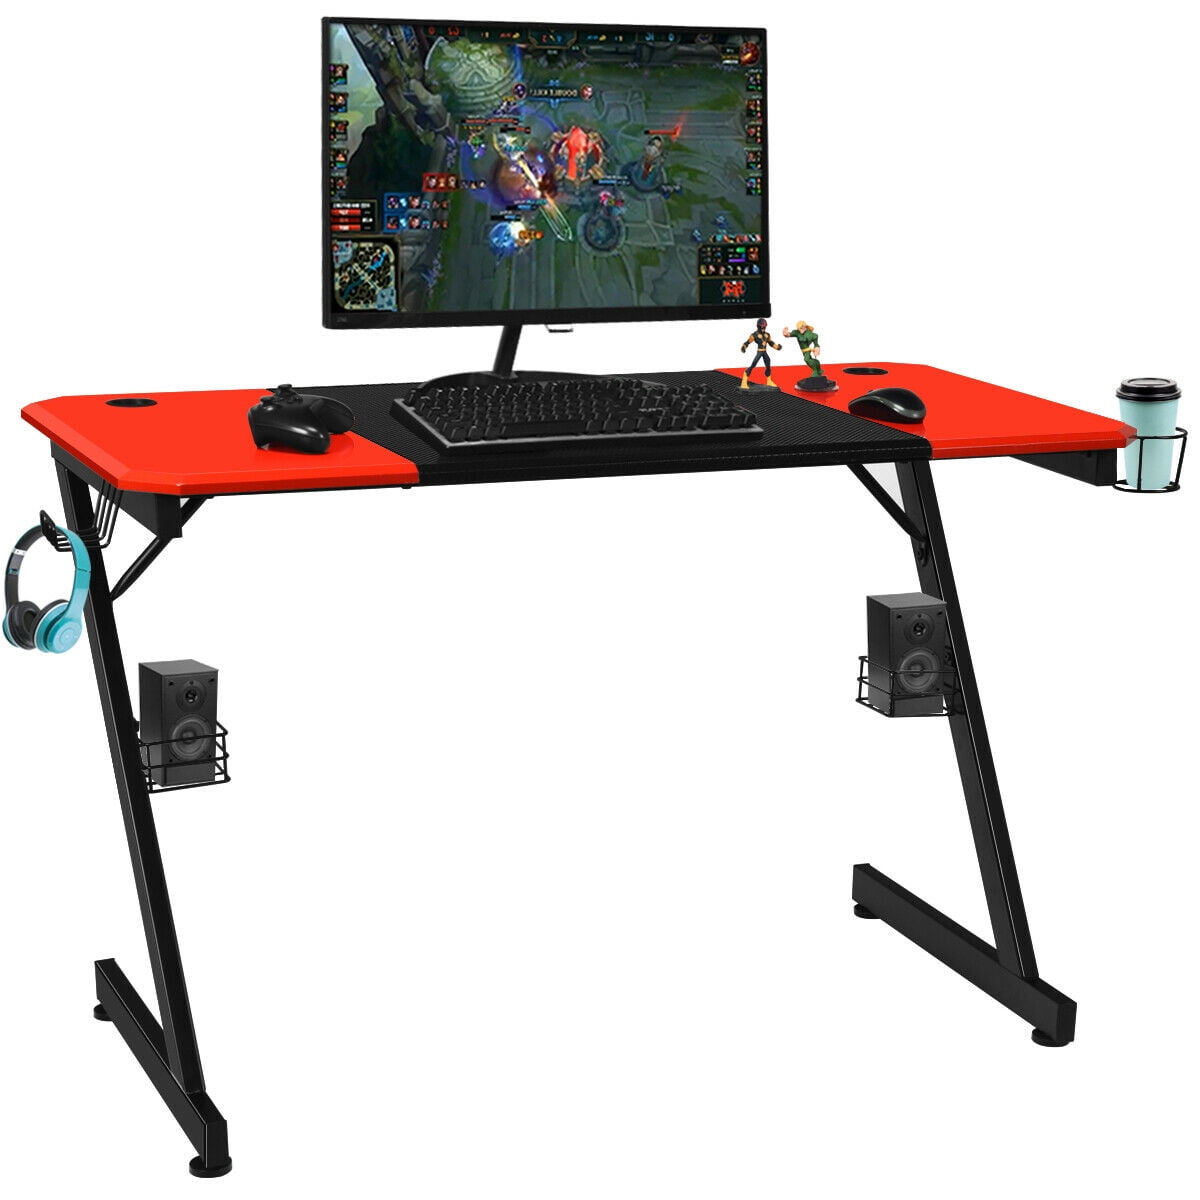 Cable Management Home Office Gamer Table Workstation with Cup Holder Carbon Fiber Surface Headphone Hook HOMCOM 47 inch Gaming Computer Desk 